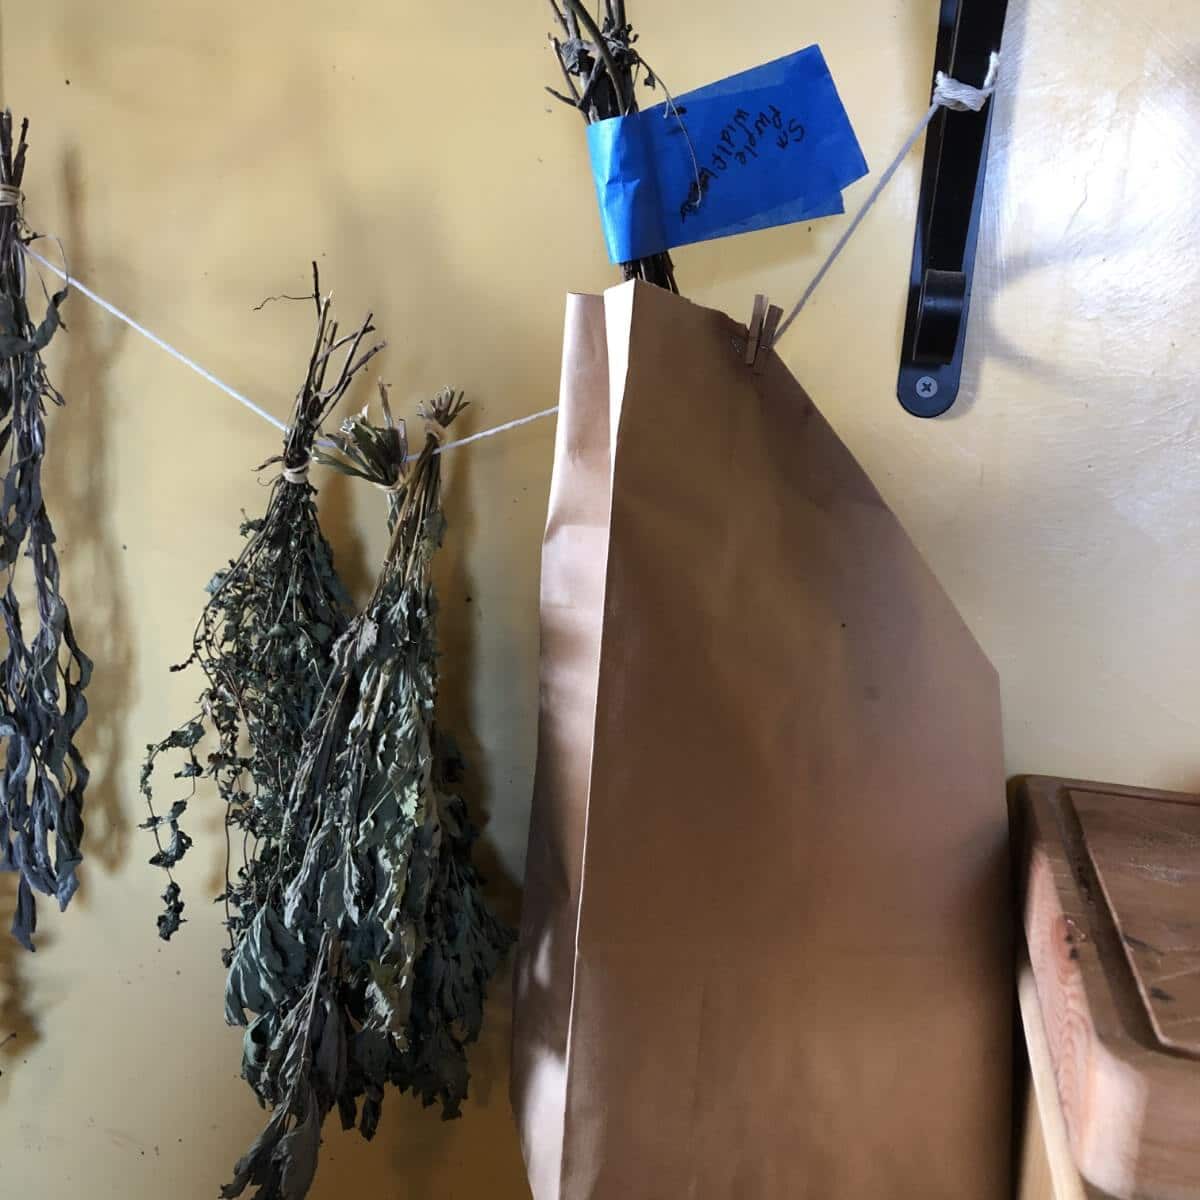 dried bundle of herb flowers bagged to catch the falling seed